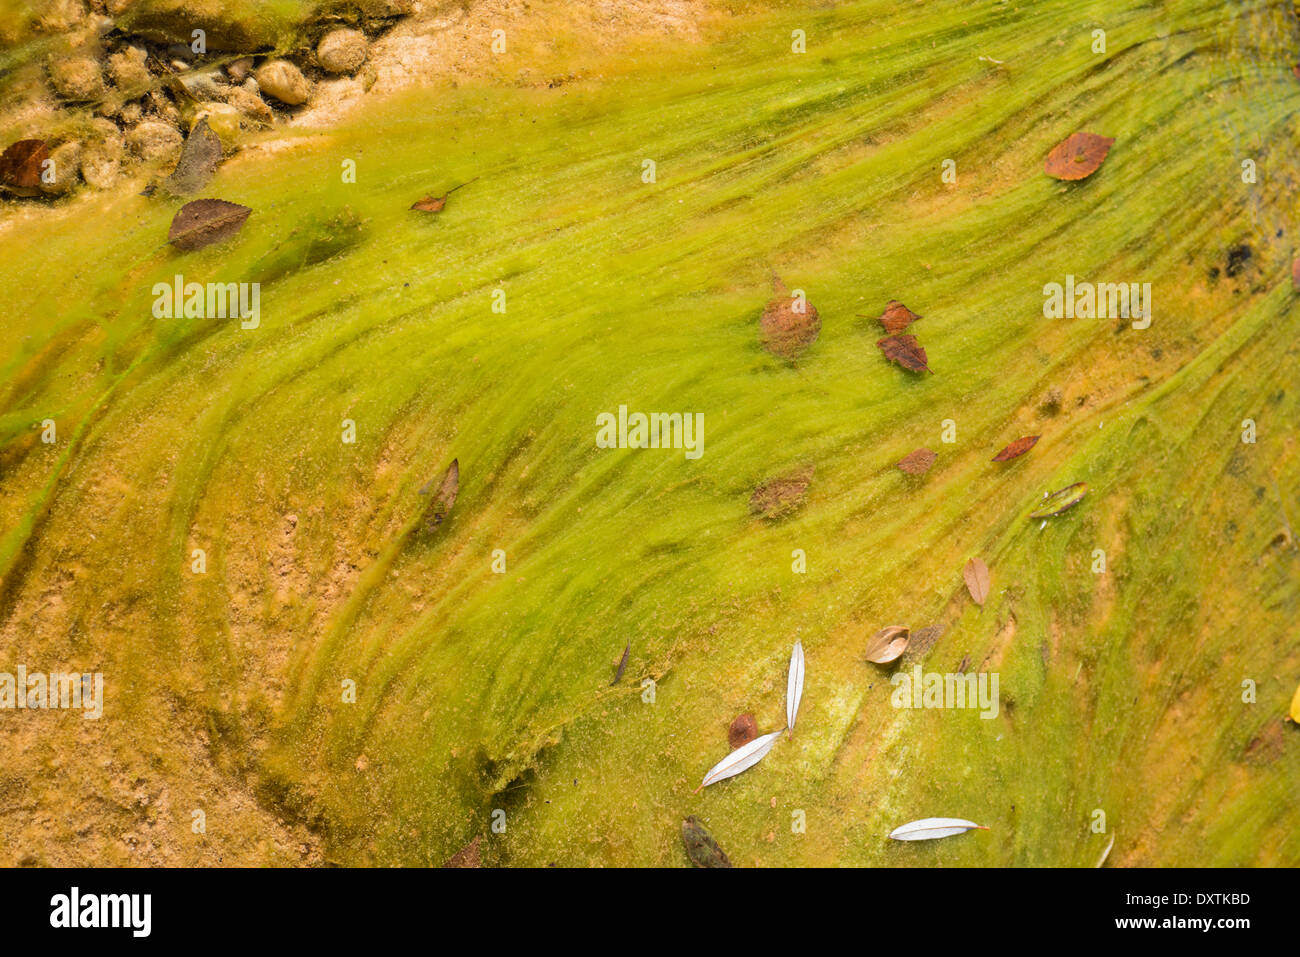 Rock pools carved by a creek harbouring filament algae and clean mountain water, Mura, Spain Stock Photo